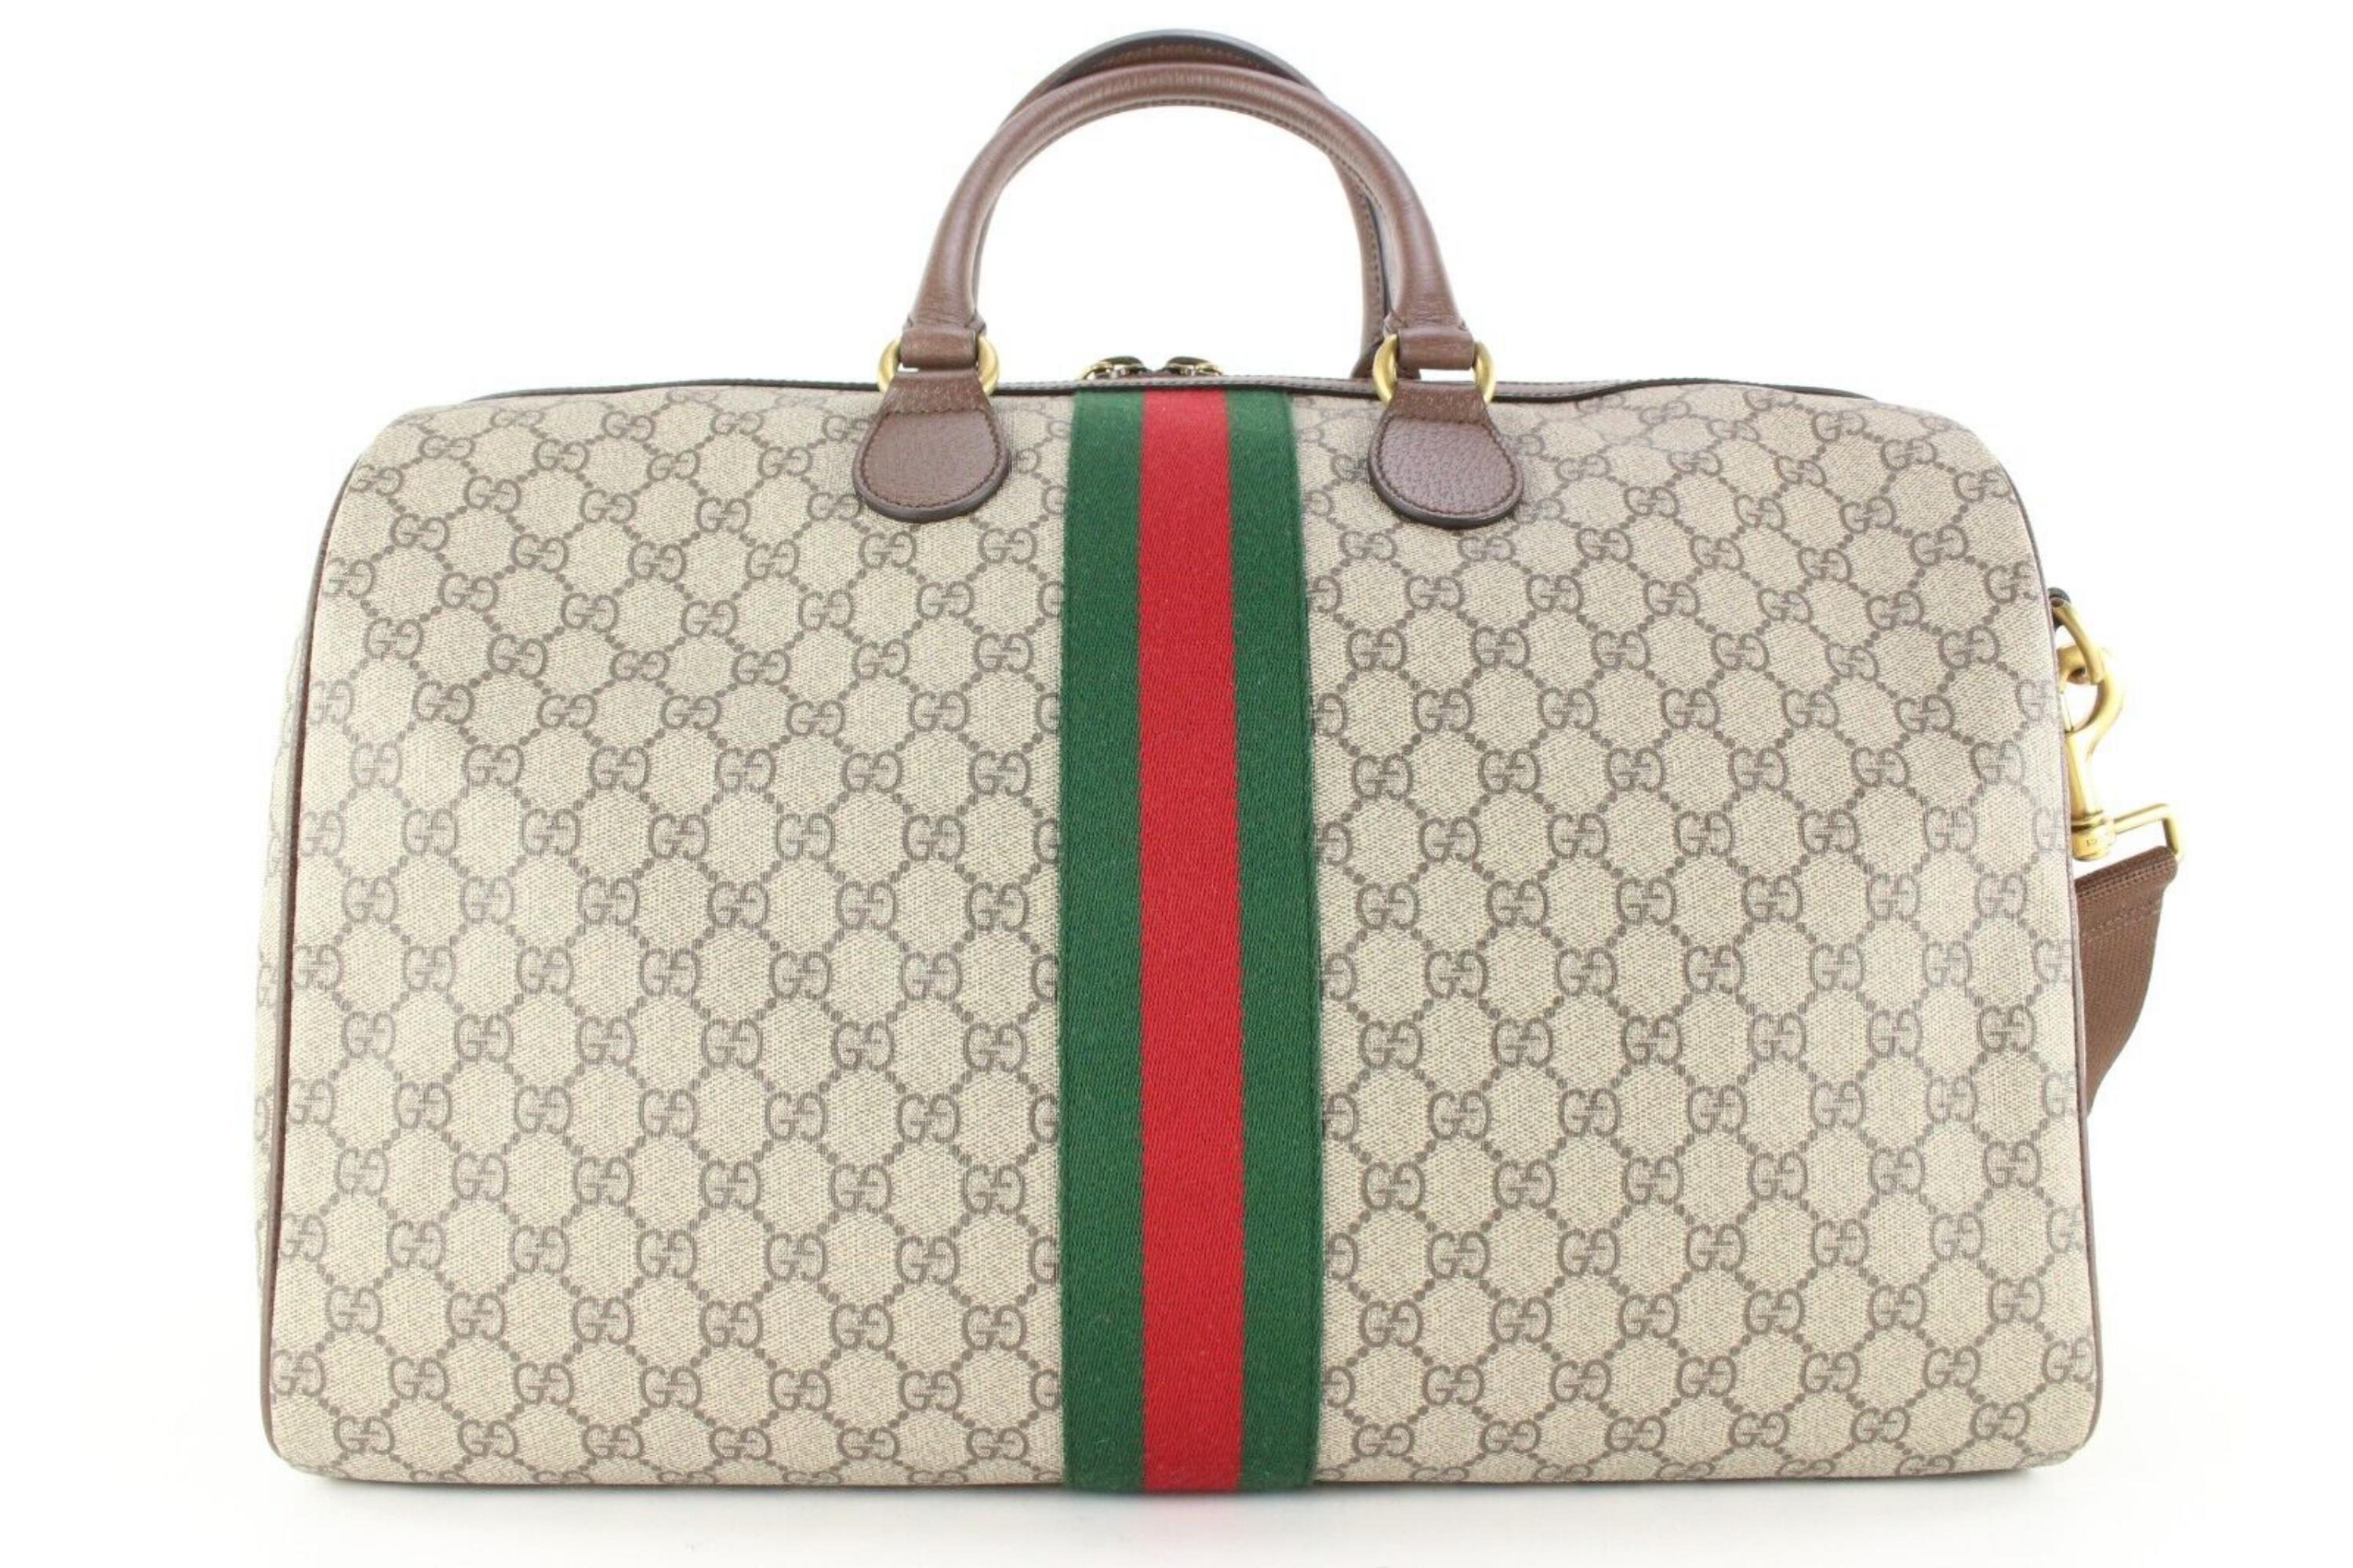 Beige Gucci Monogram GG Supreme Savoy Duffle Bag with Strap 1GG1221 For Sale